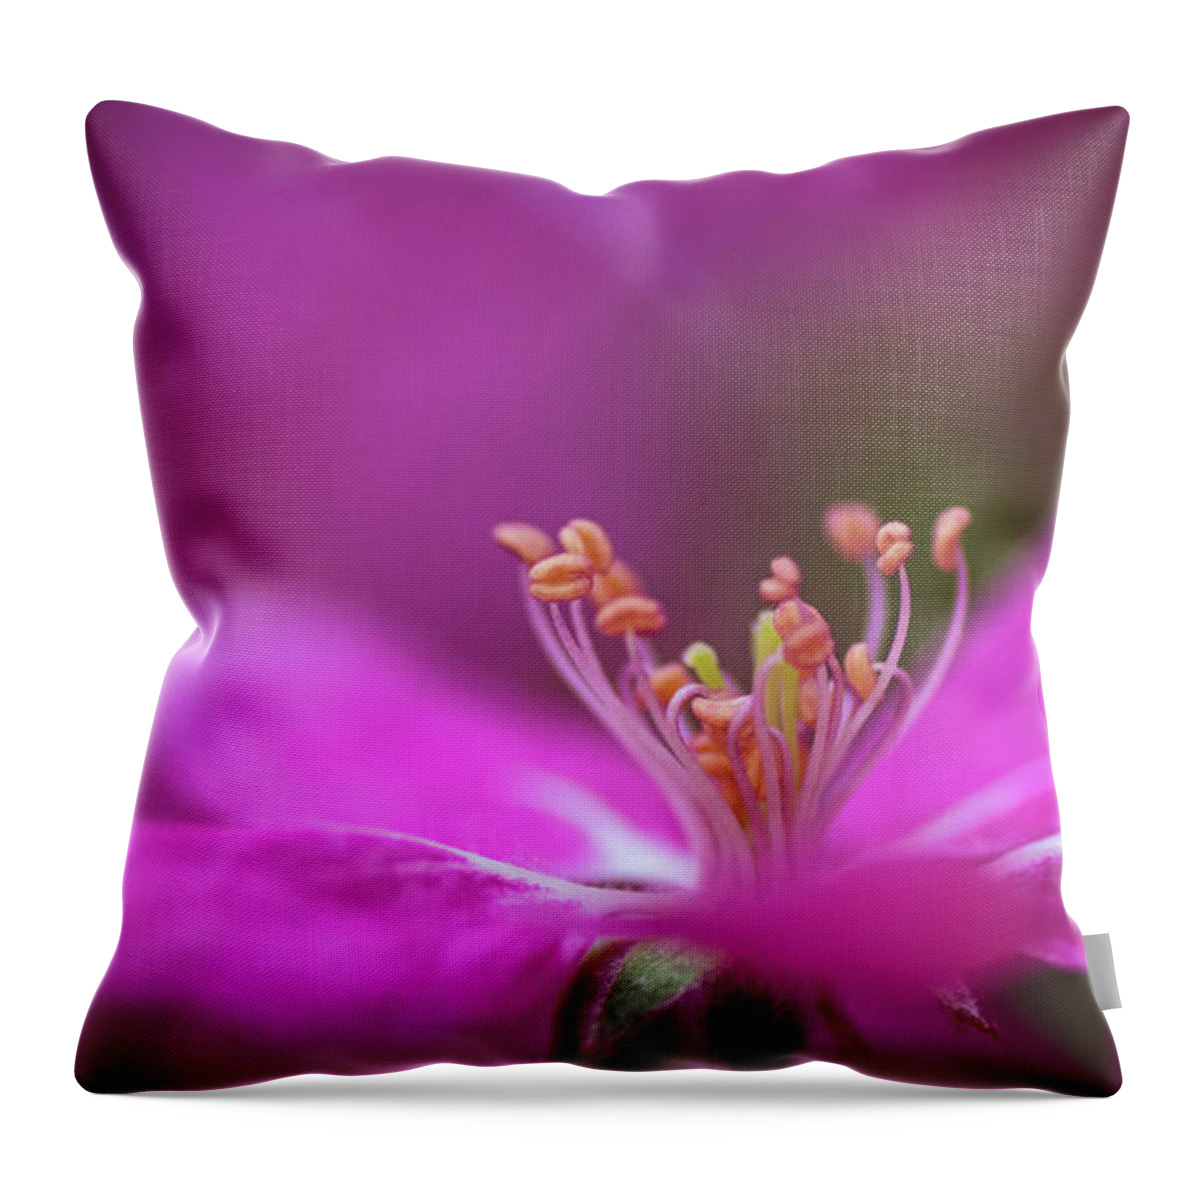 Pink Throw Pillow featuring the photograph Dancing In Pink by Pamela Dunn-Parrish